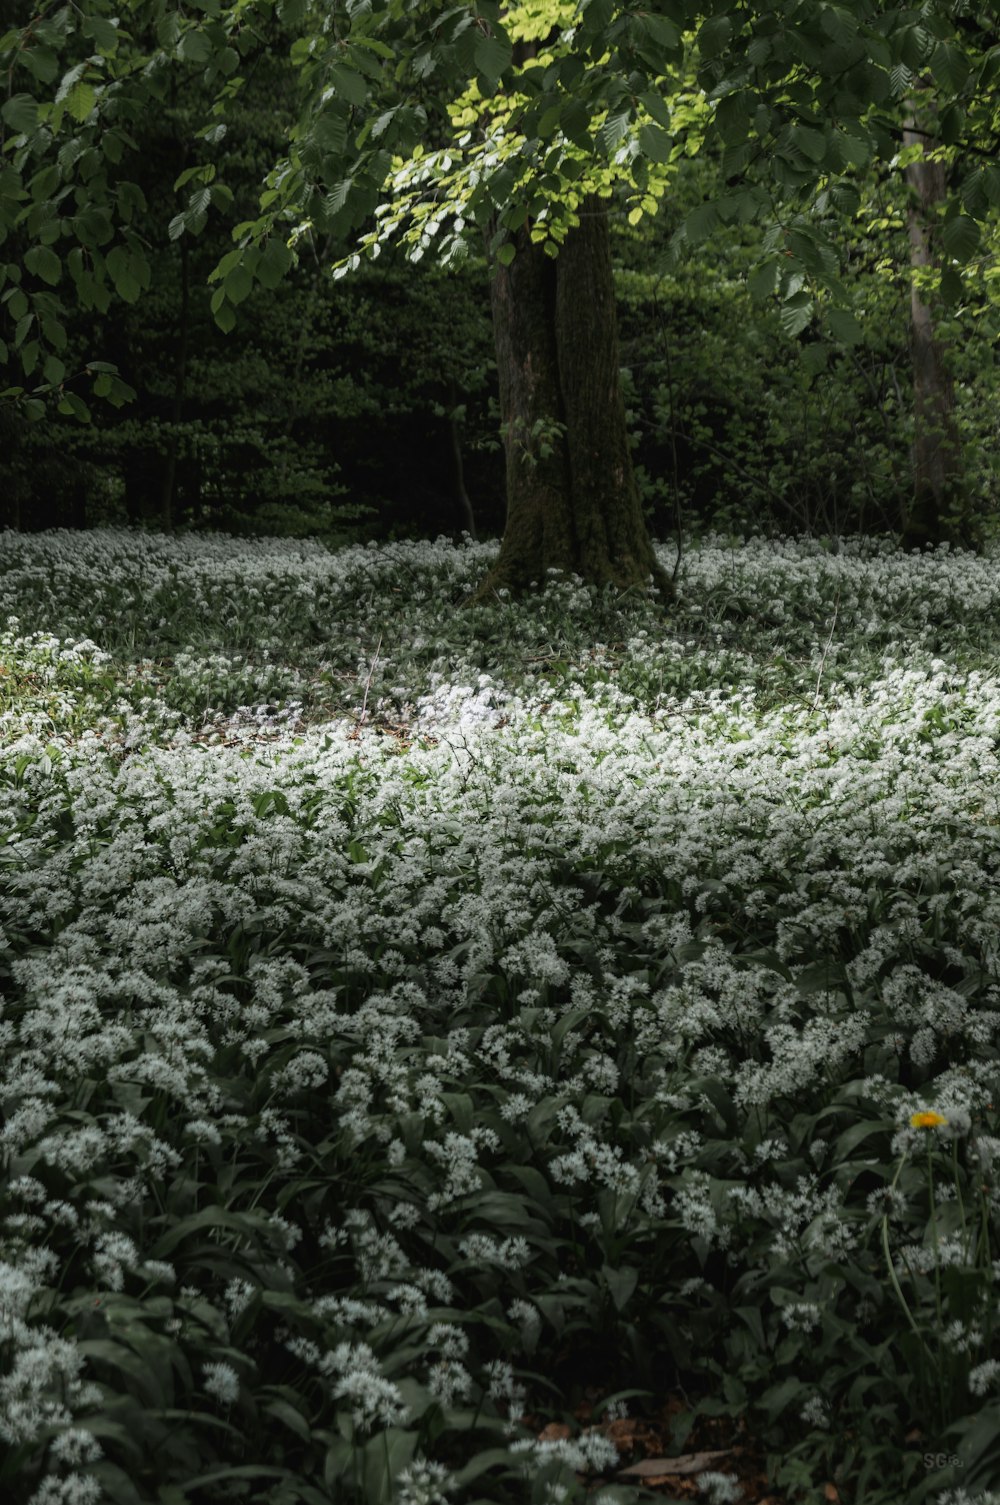 a field full of white flowers next to a tree